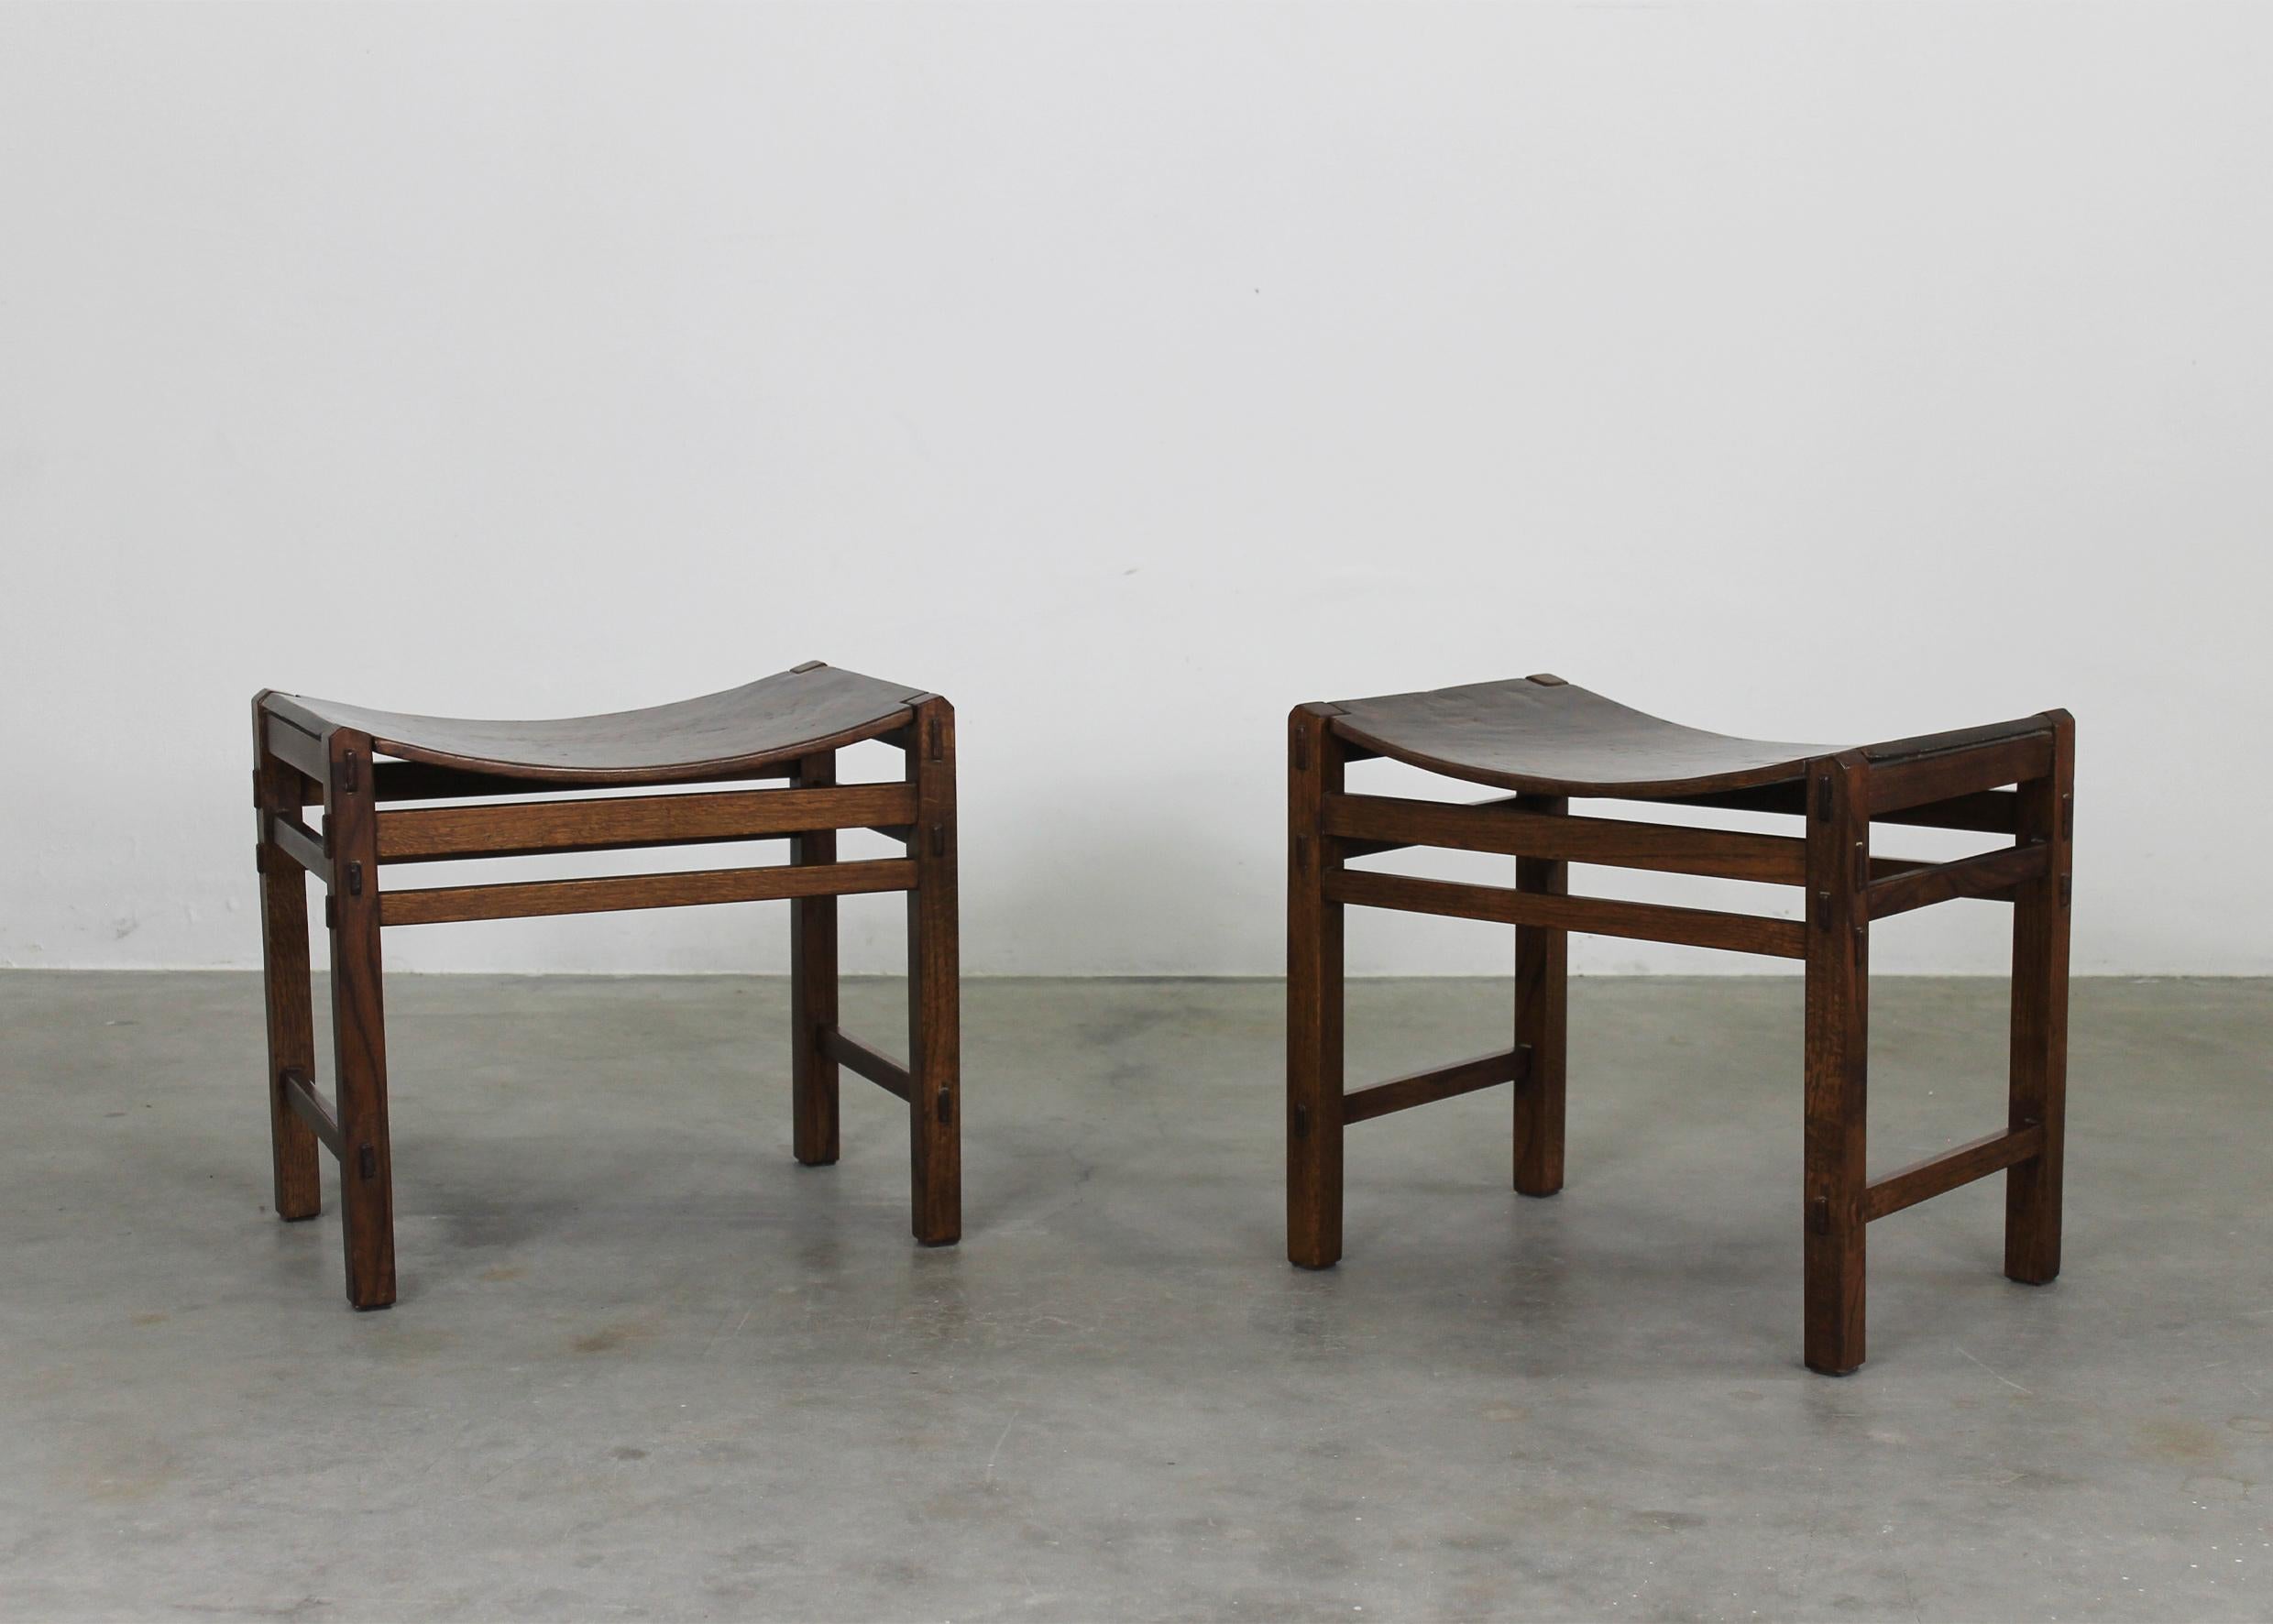 Late 20th Century Giuseppe Rivadossi Set of Two Stools in Oak Wood by Officina Rivadossi 1970s For Sale